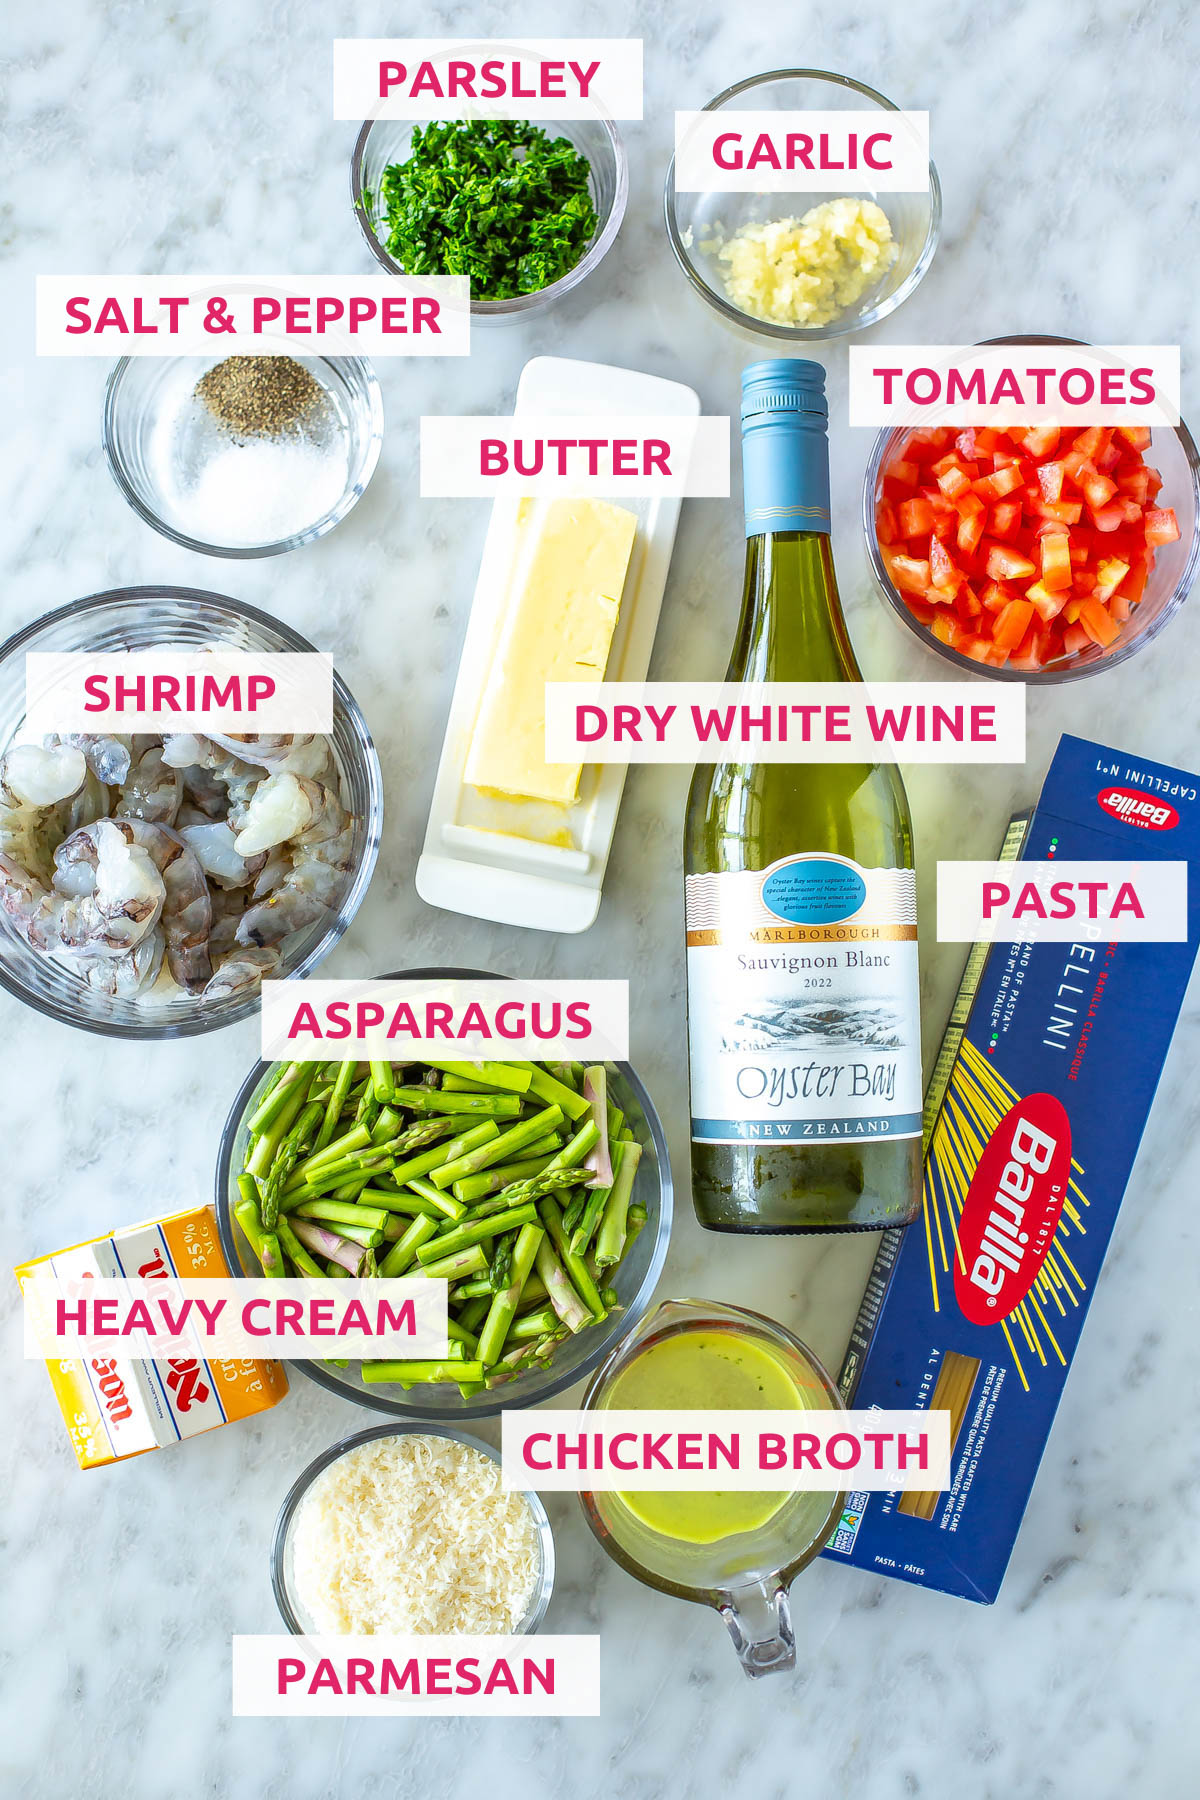 Ingredients for copycat Olive Garden Shrimp Scampi: shrimp, asparagus, heavy cream, parmesan, chicken broth, pasta, dry white wine, tomatoes, butter, salt, pepper, parsley and garlic.